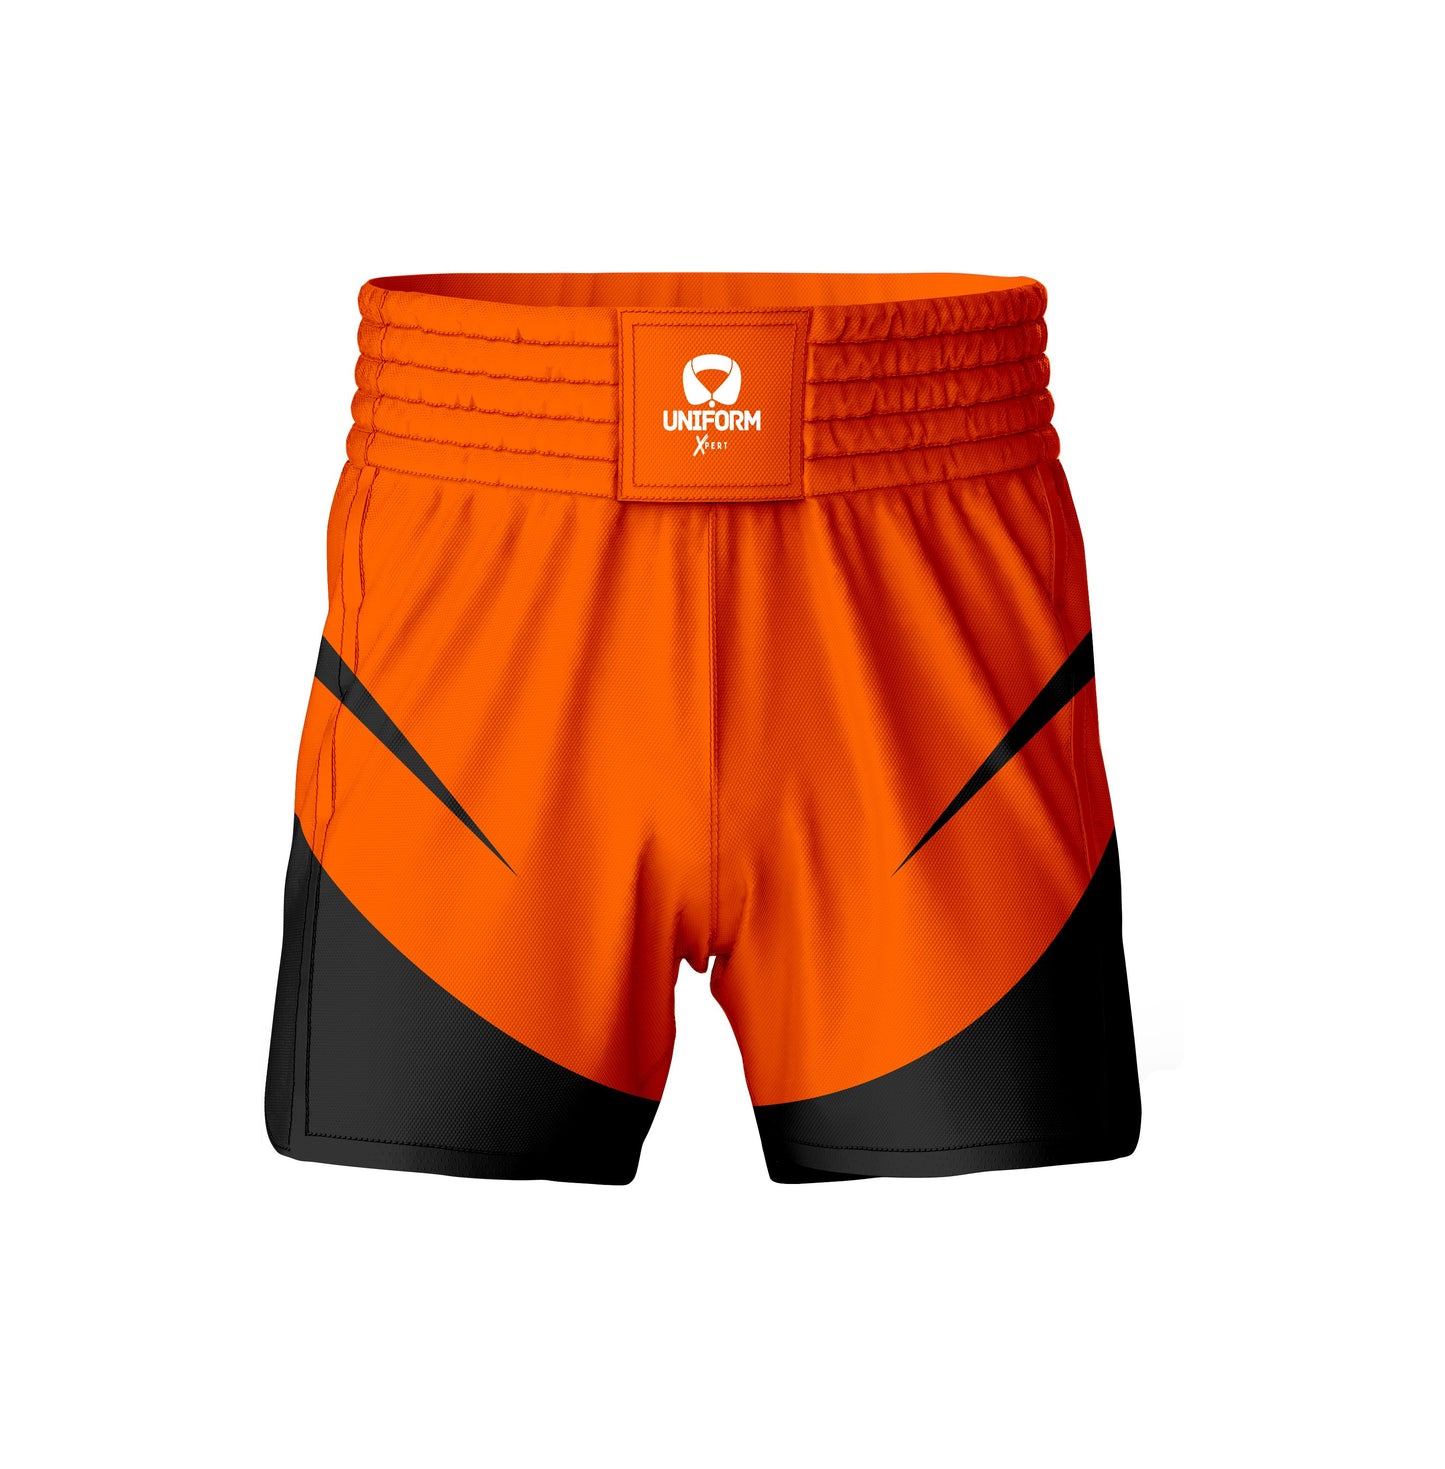 Orange MMA Shorts: Energize your training sessions with our bold orange MMA shorts. Designed for durability and flexibility, these shorts offer exceptional comfort and freedom of movement during intense workouts. Make a statement in the gym with our premium orange design. Keywords: orange MMA shorts, mixed martial arts shorts, training gear, athletic shorts